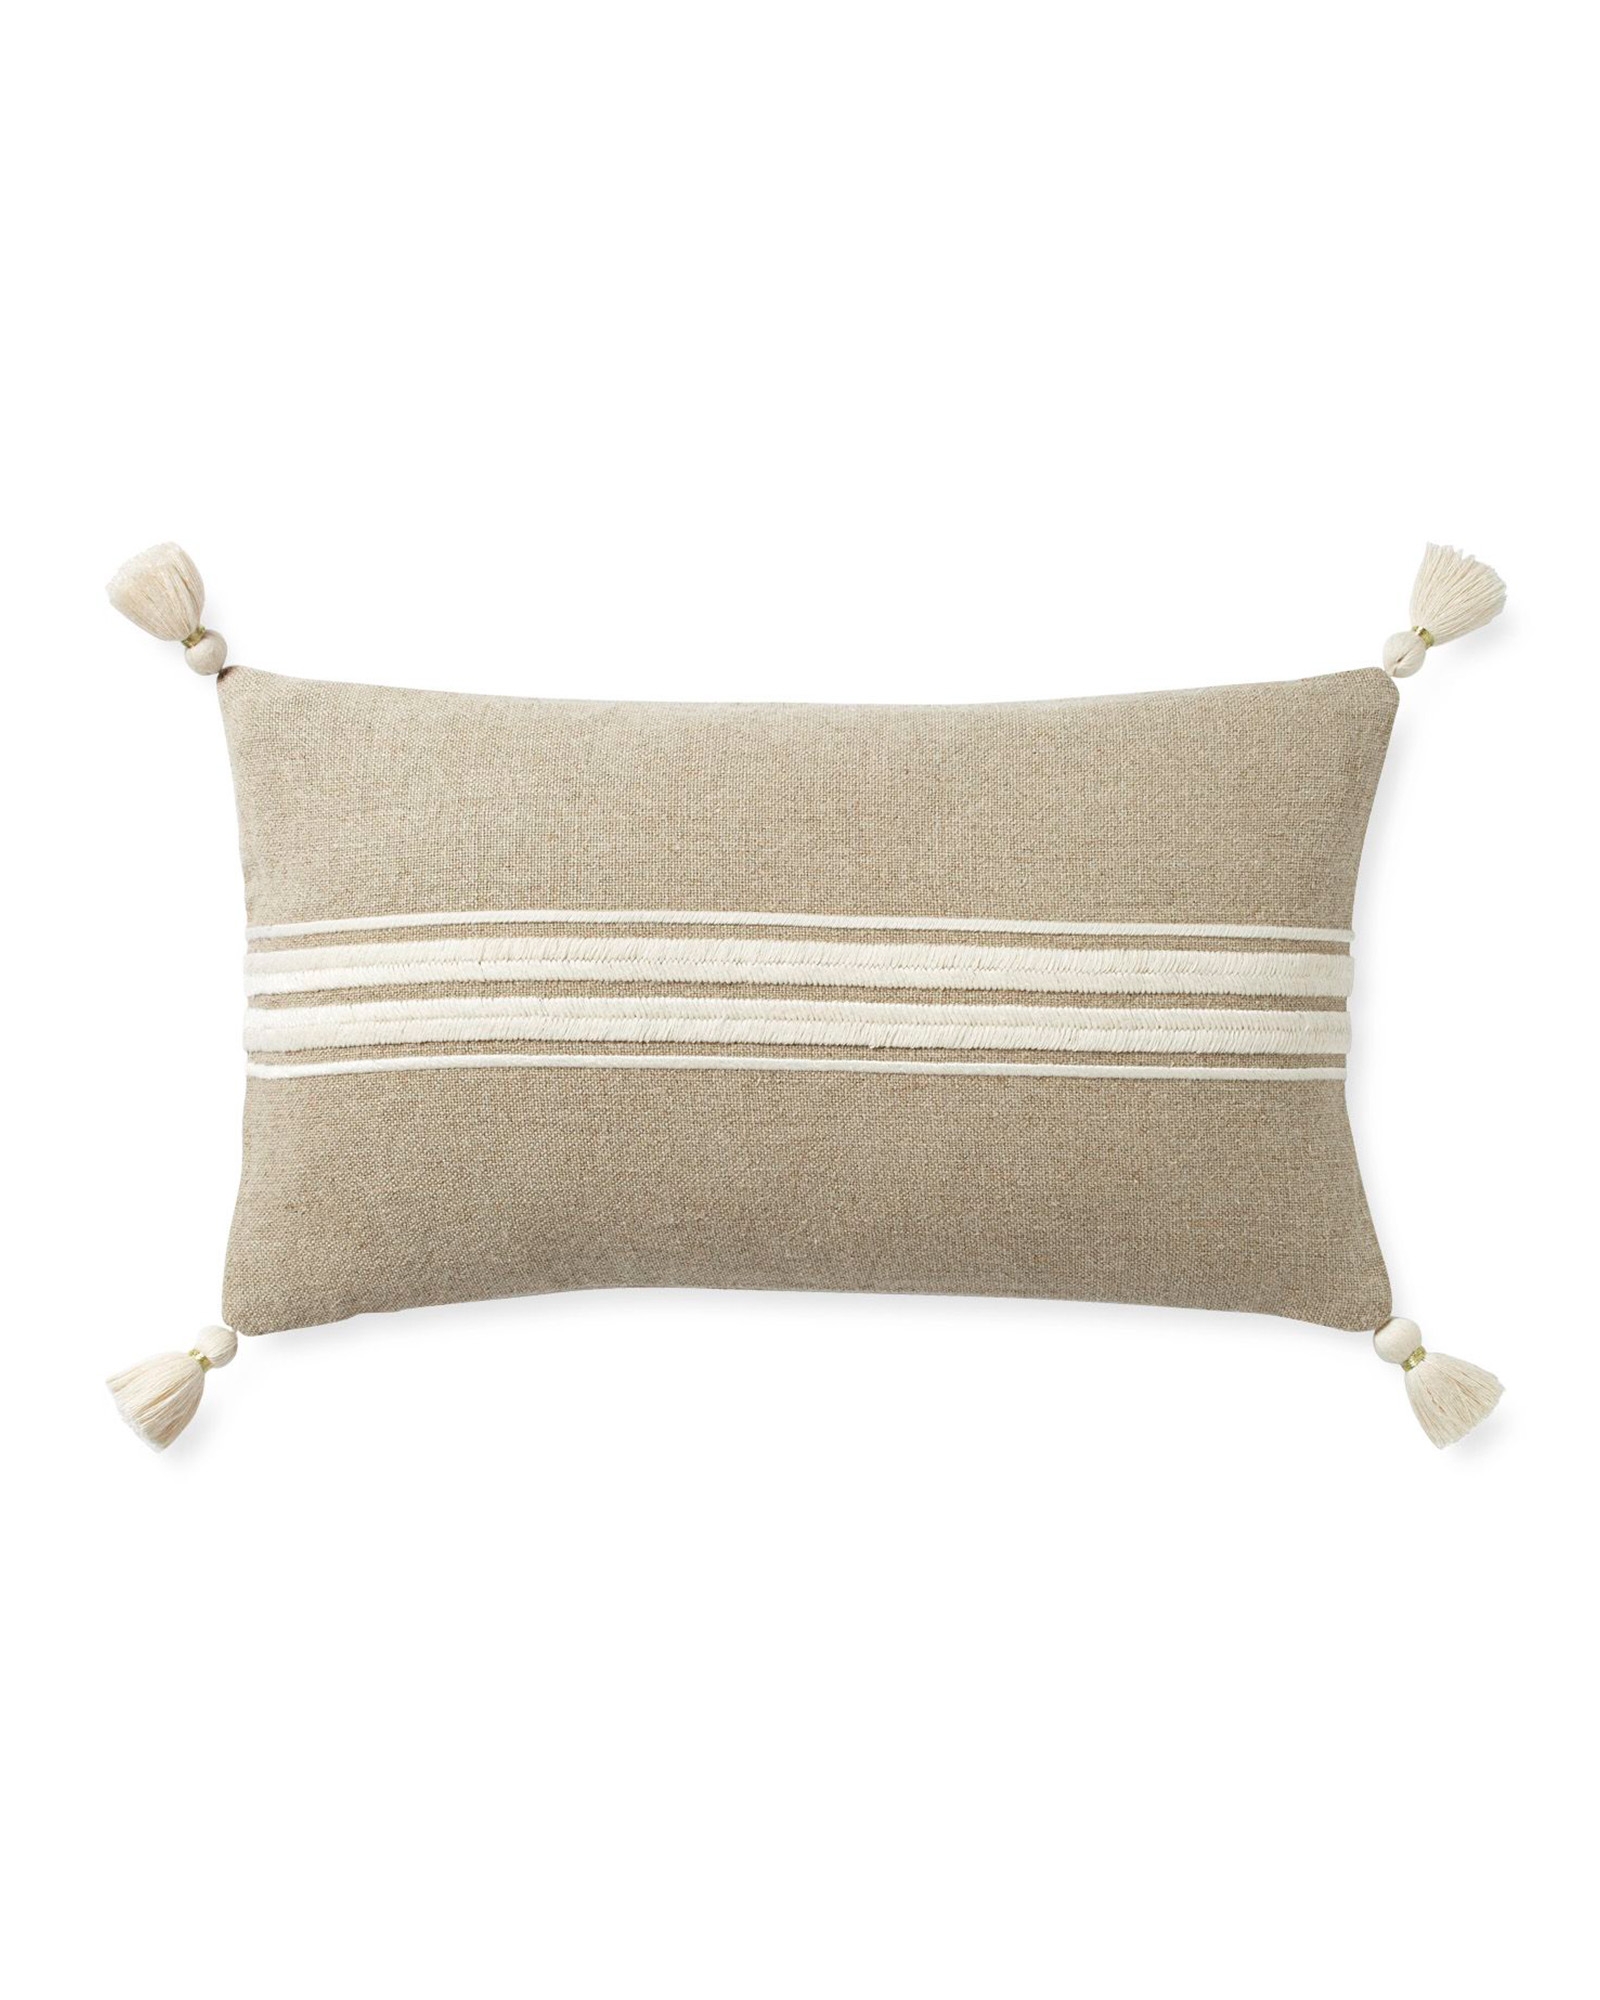 Addie Stripe Tassel 12" x 21" Pillow Cover - Flax/Ivory - Insert Sold Separately - Image 0